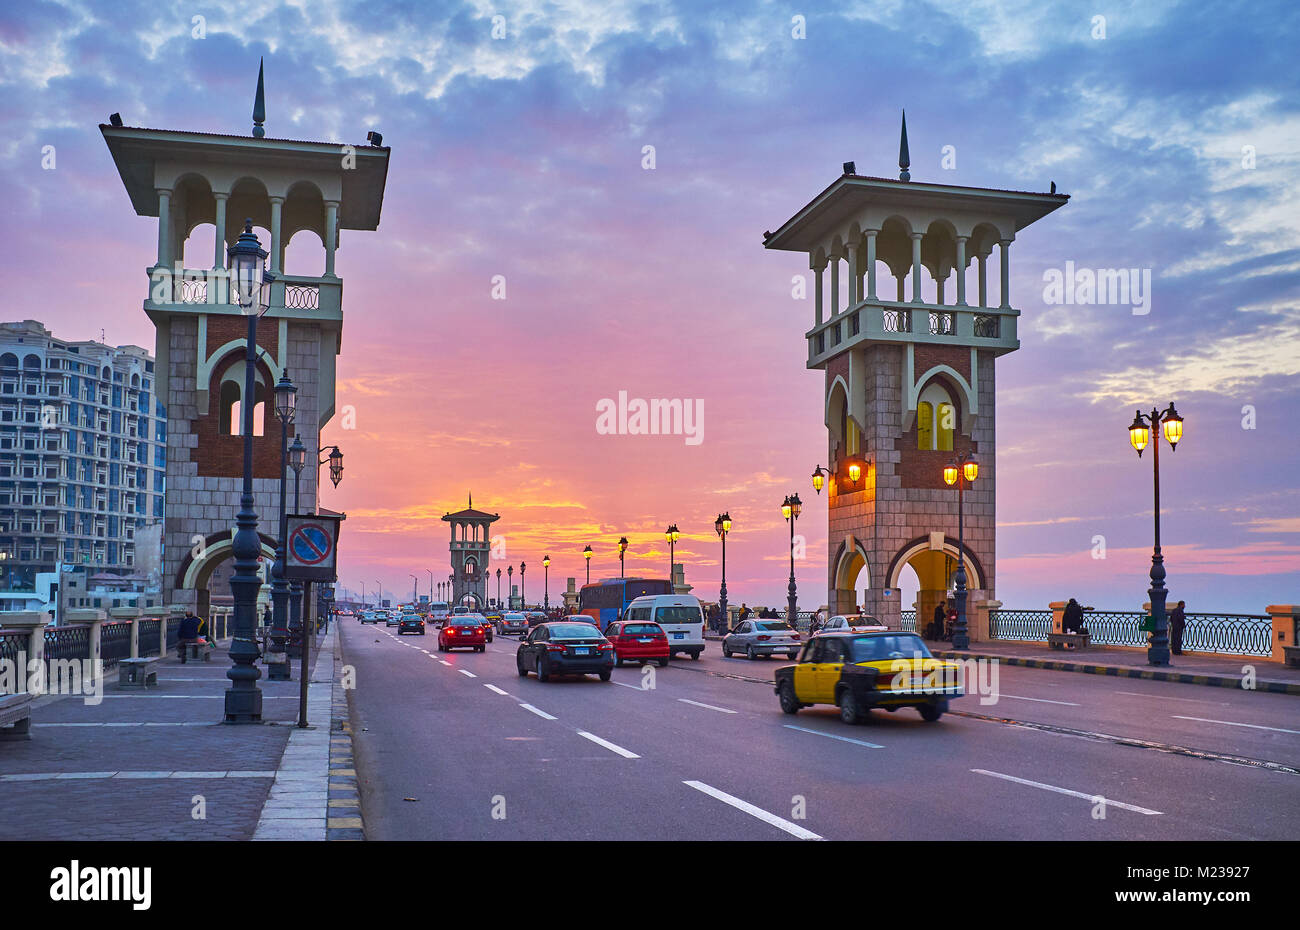 ALEXANDRIA, EGYPT - DECEMBER 17, 2017: The fast traffic along the Stanley bridge with a view on the bright sunset sky, on December 17 in Alexandria. Stock Photo